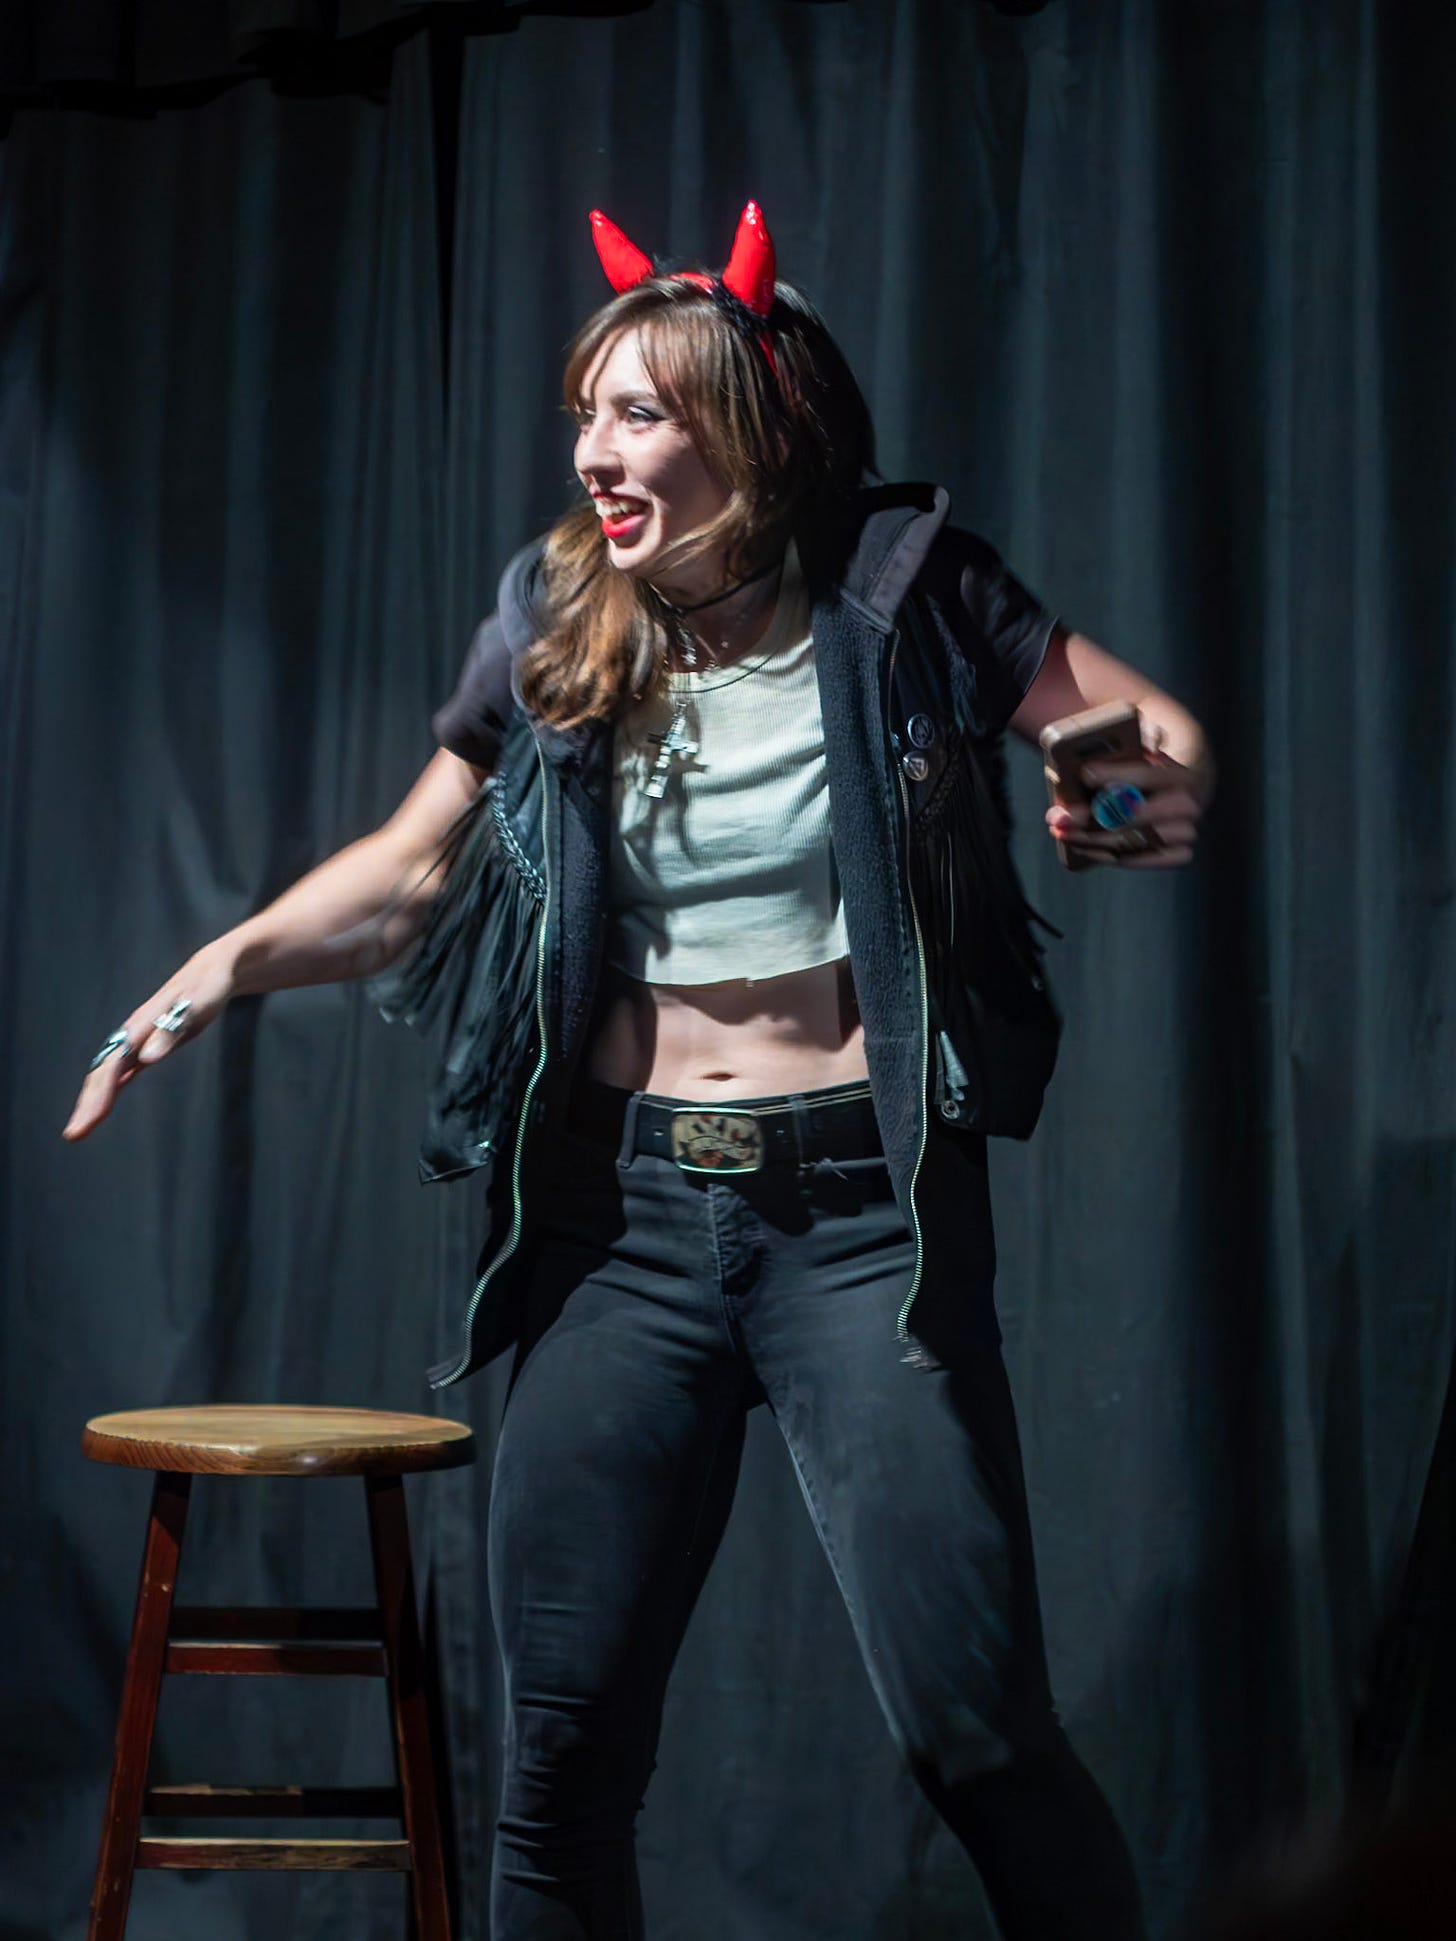 Cara stands on a stage, wearing red devil horns, jeans, and a black leather hoodie and vest, she is gesturing and smiling wildly.